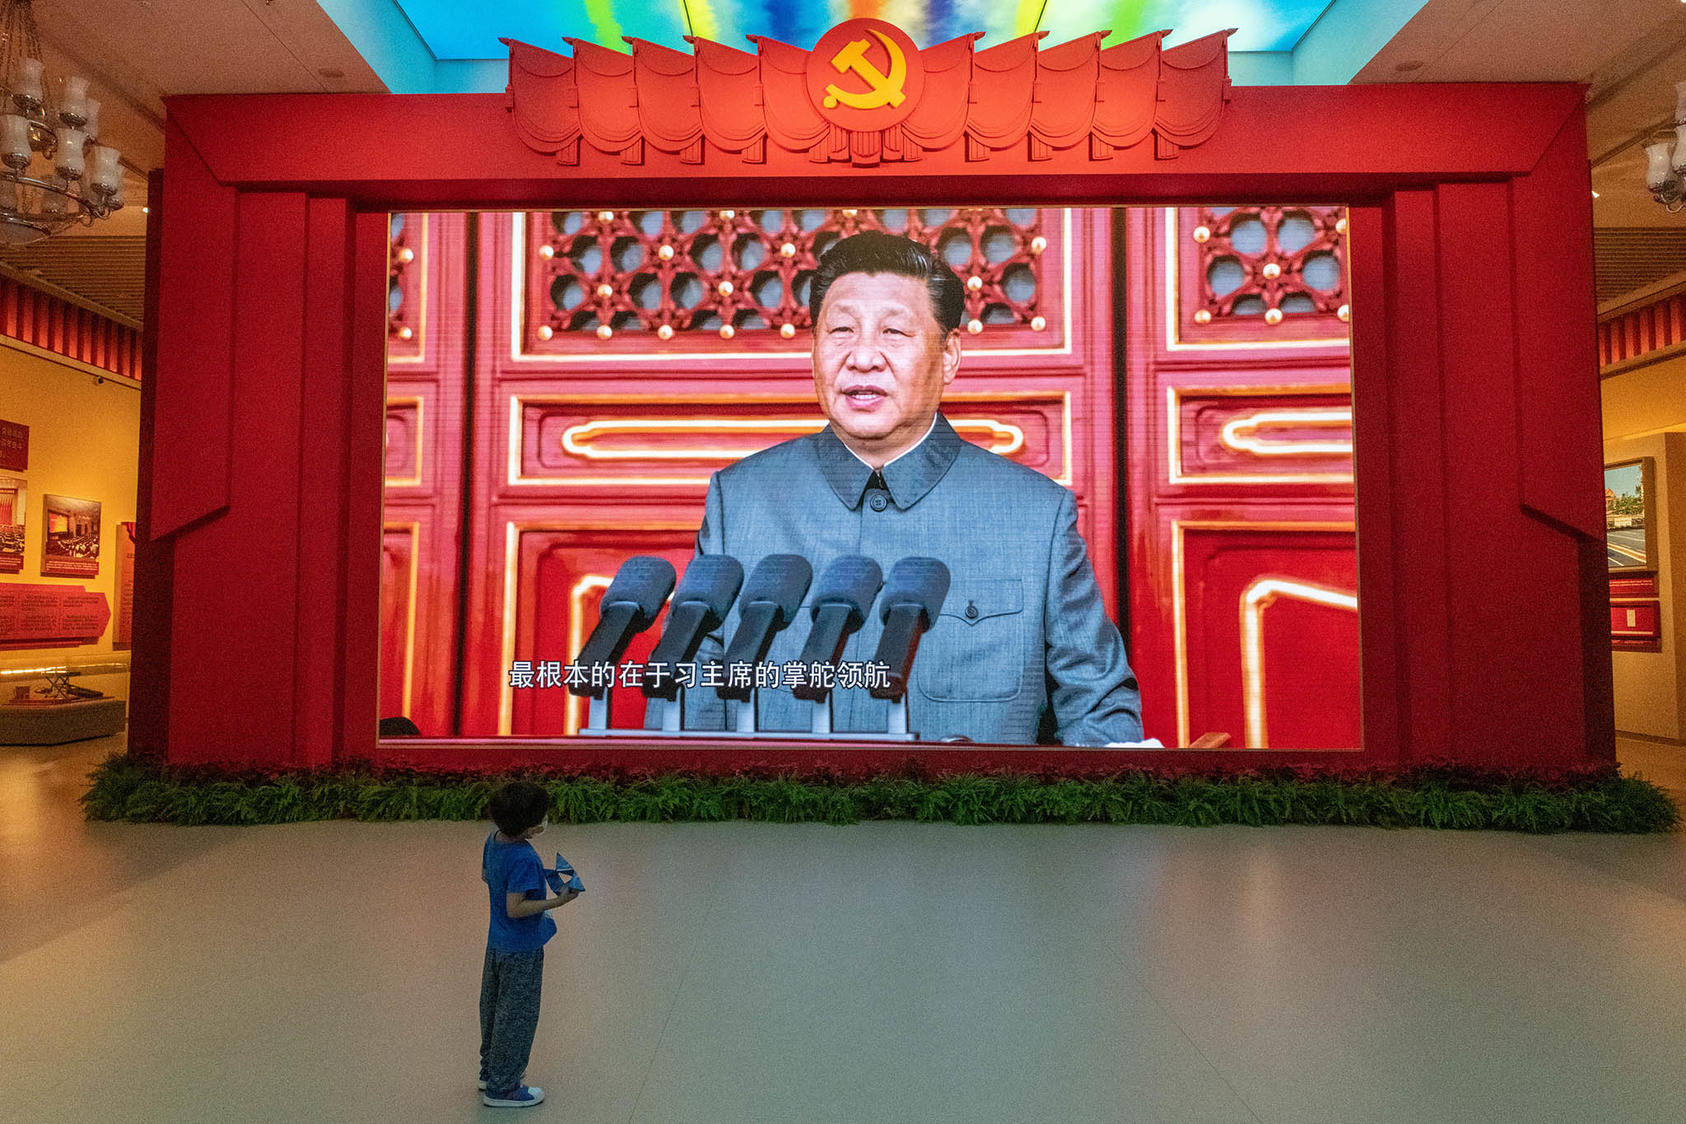 Chinese President Xi Jinping appears in a video at the military museum in Beijing, Sept. 2, 2022. (Gilles Sabrié/The New York Times)